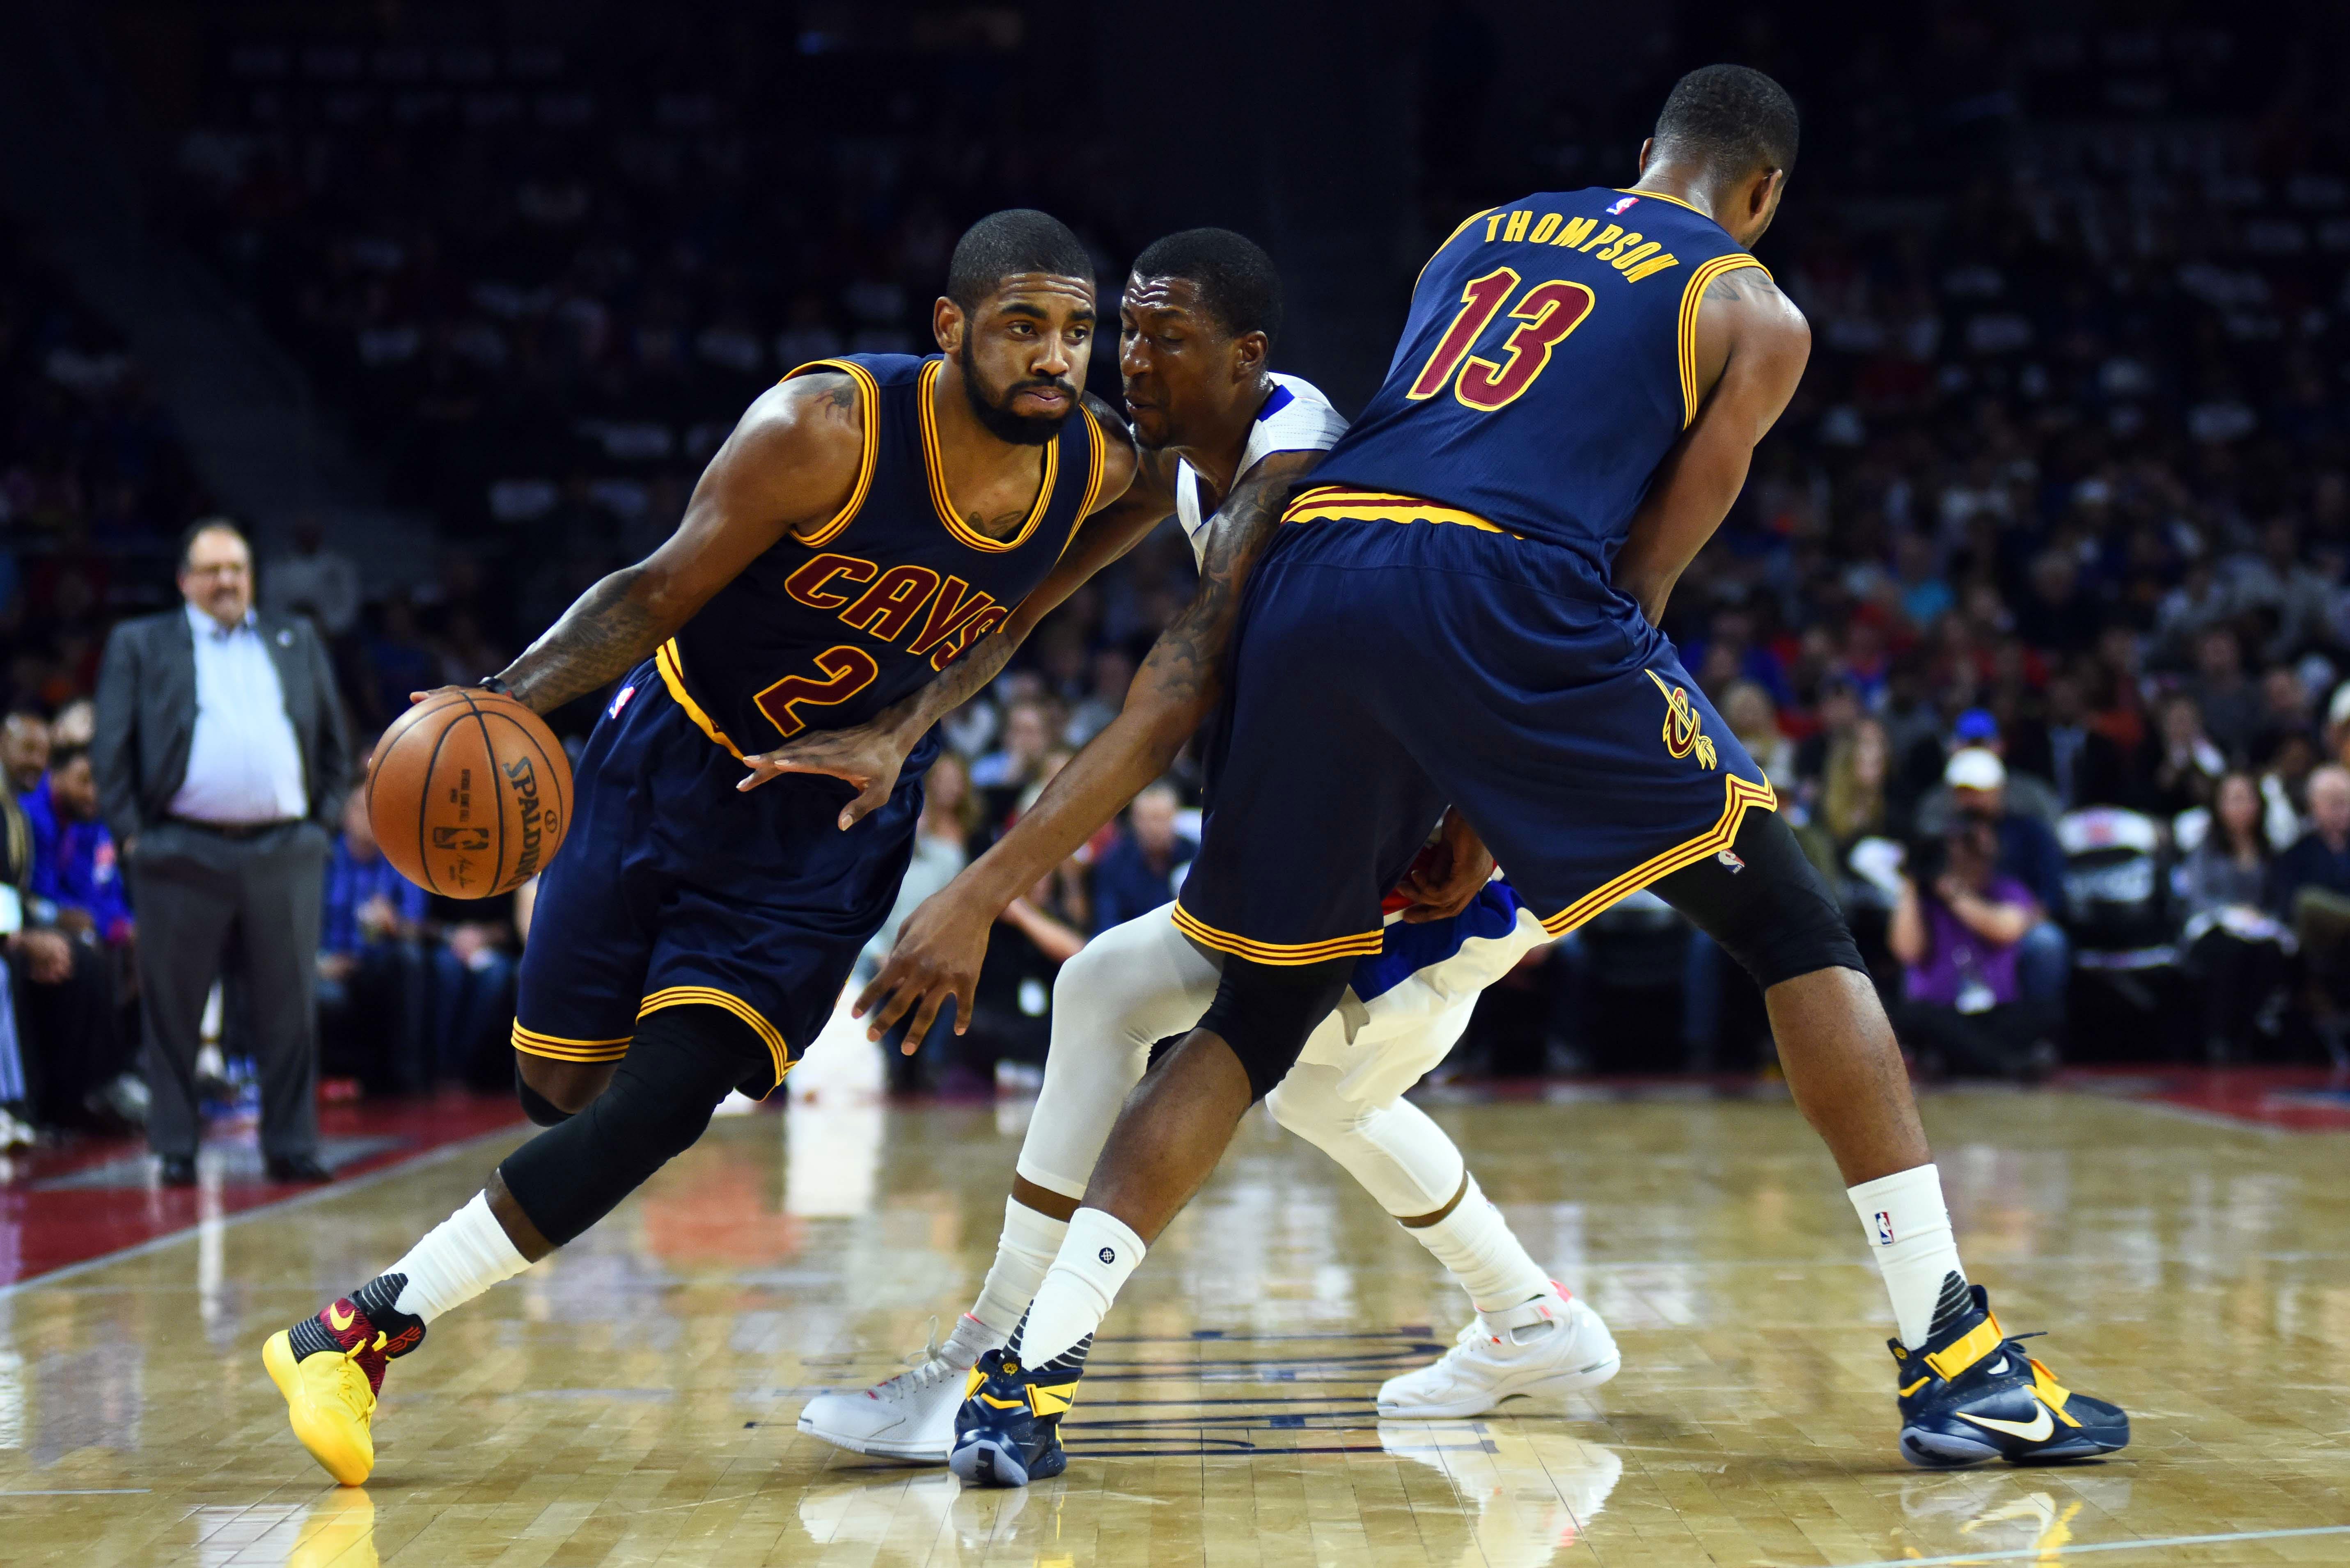 Kyrie Irving disapproval on LeBron James joining Cleveland prior 3 straight  finals and championship success